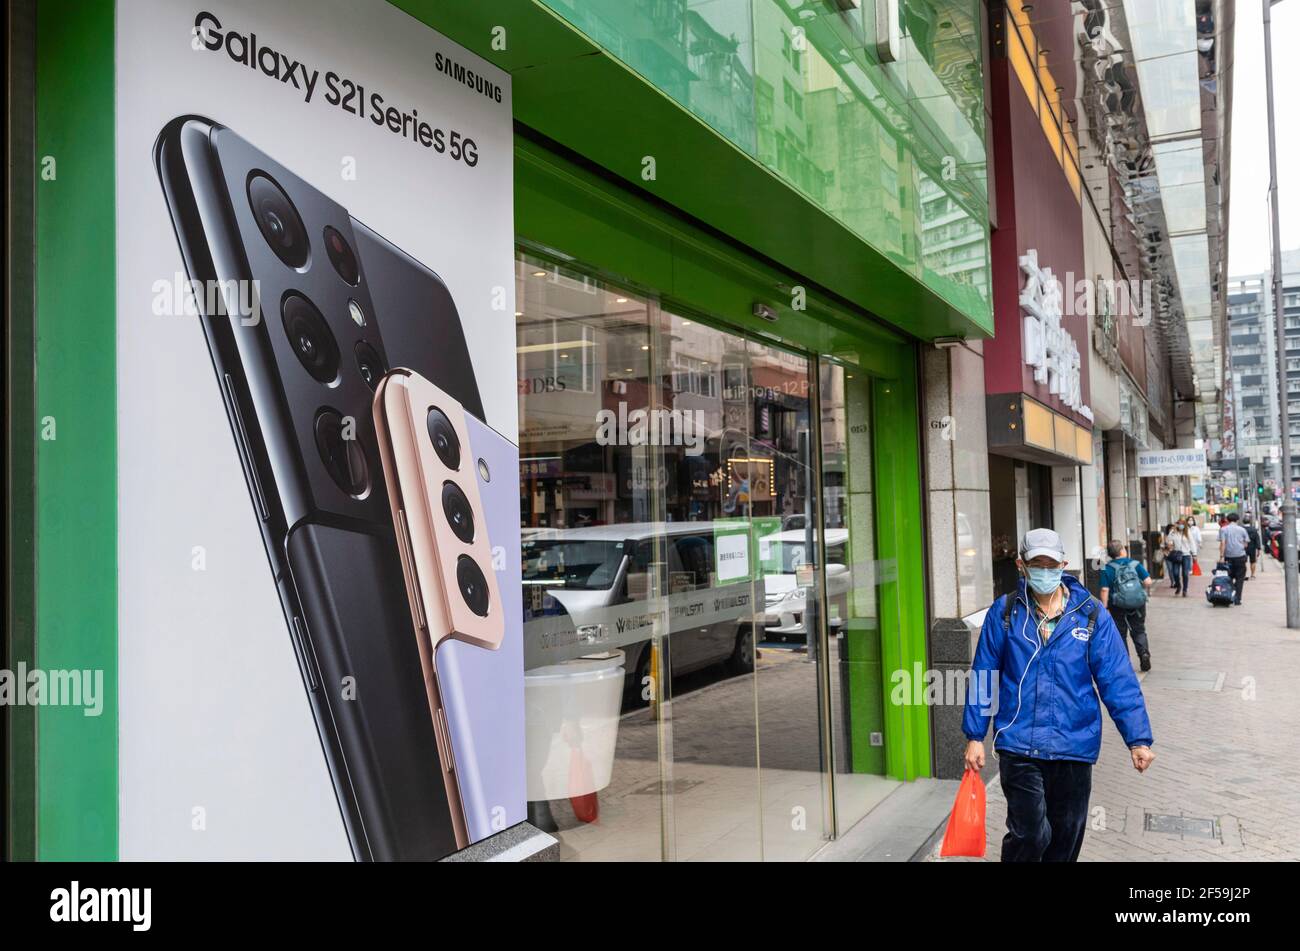 South Korean multinational electronics conglomerate Samsung advertises the Samsung Galaxy s21 5G smartphone on a billboard in Hong Kong. (Photo by Budrul Chukrut / SOPA Images/Sipa USA) Stock Photo